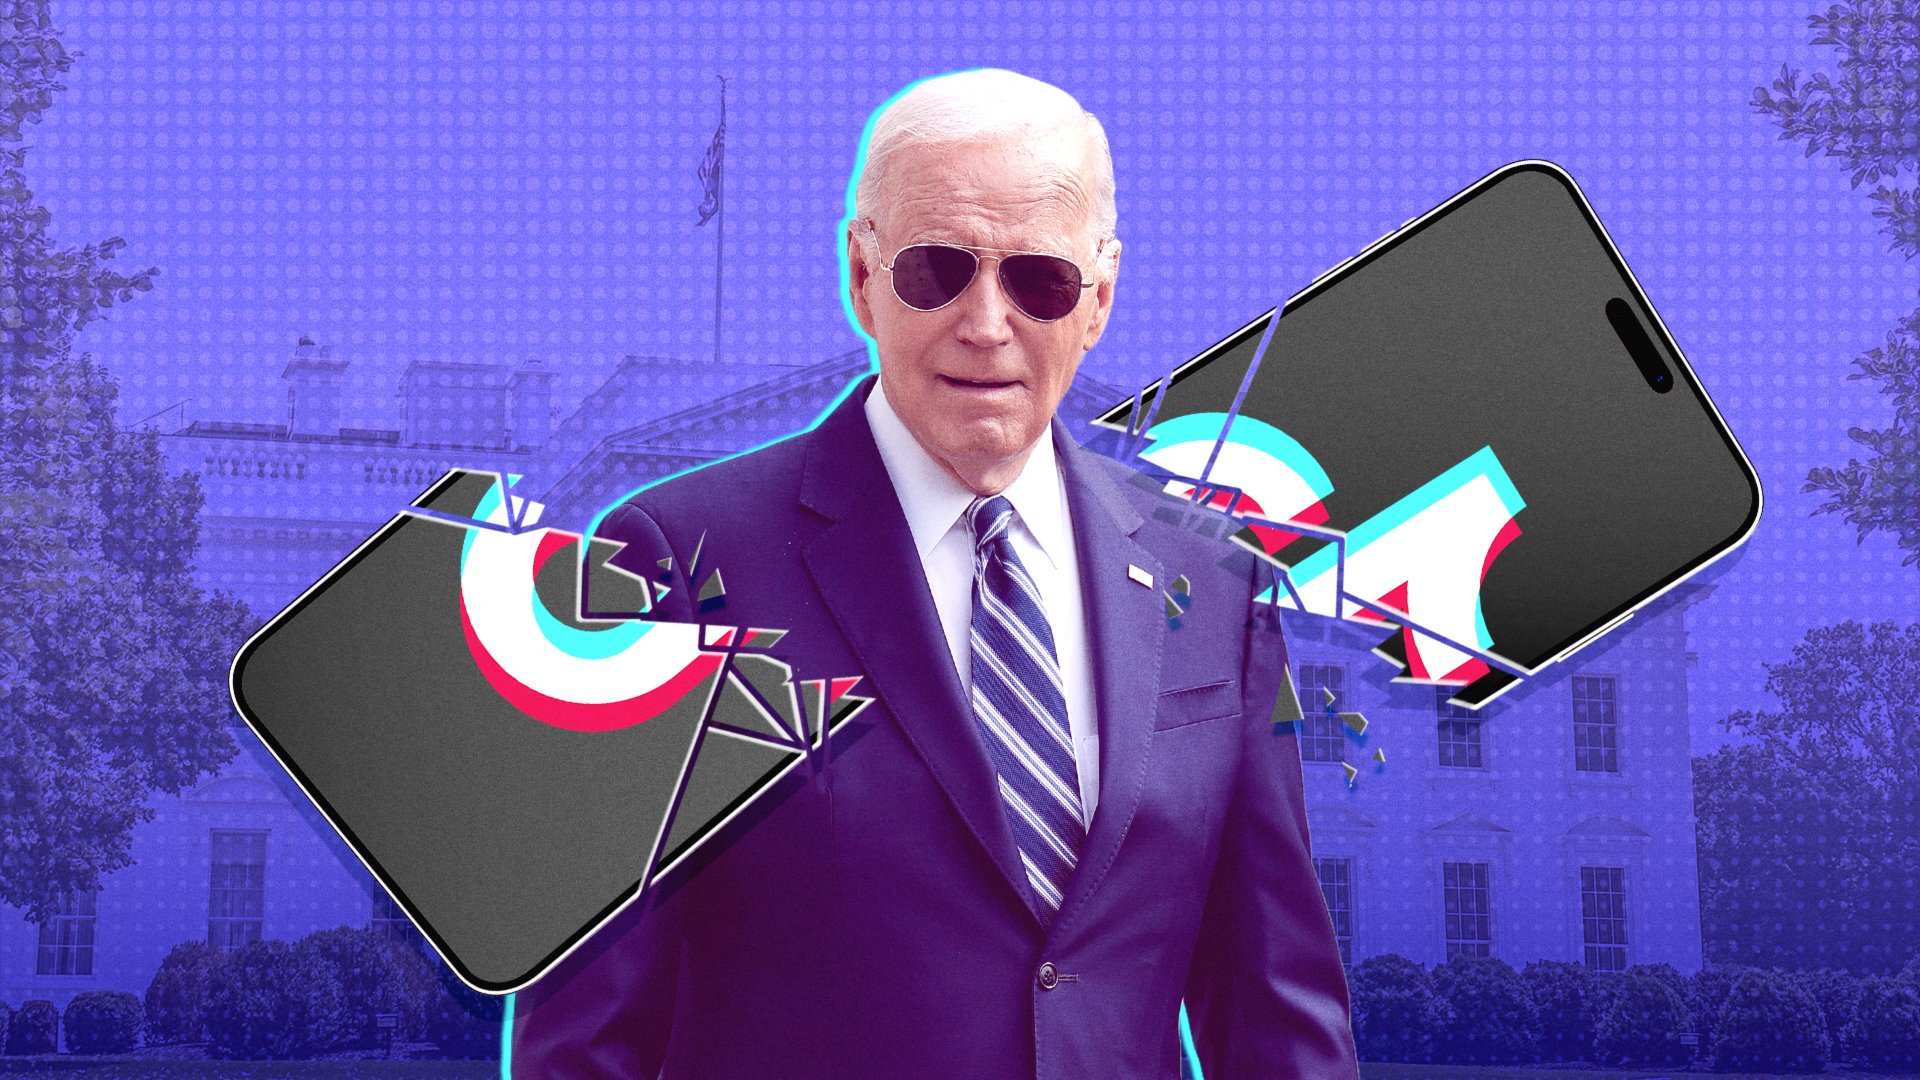 A picture of Joe Biden against a backdrop of a broken phone screen with the TikTok logo.